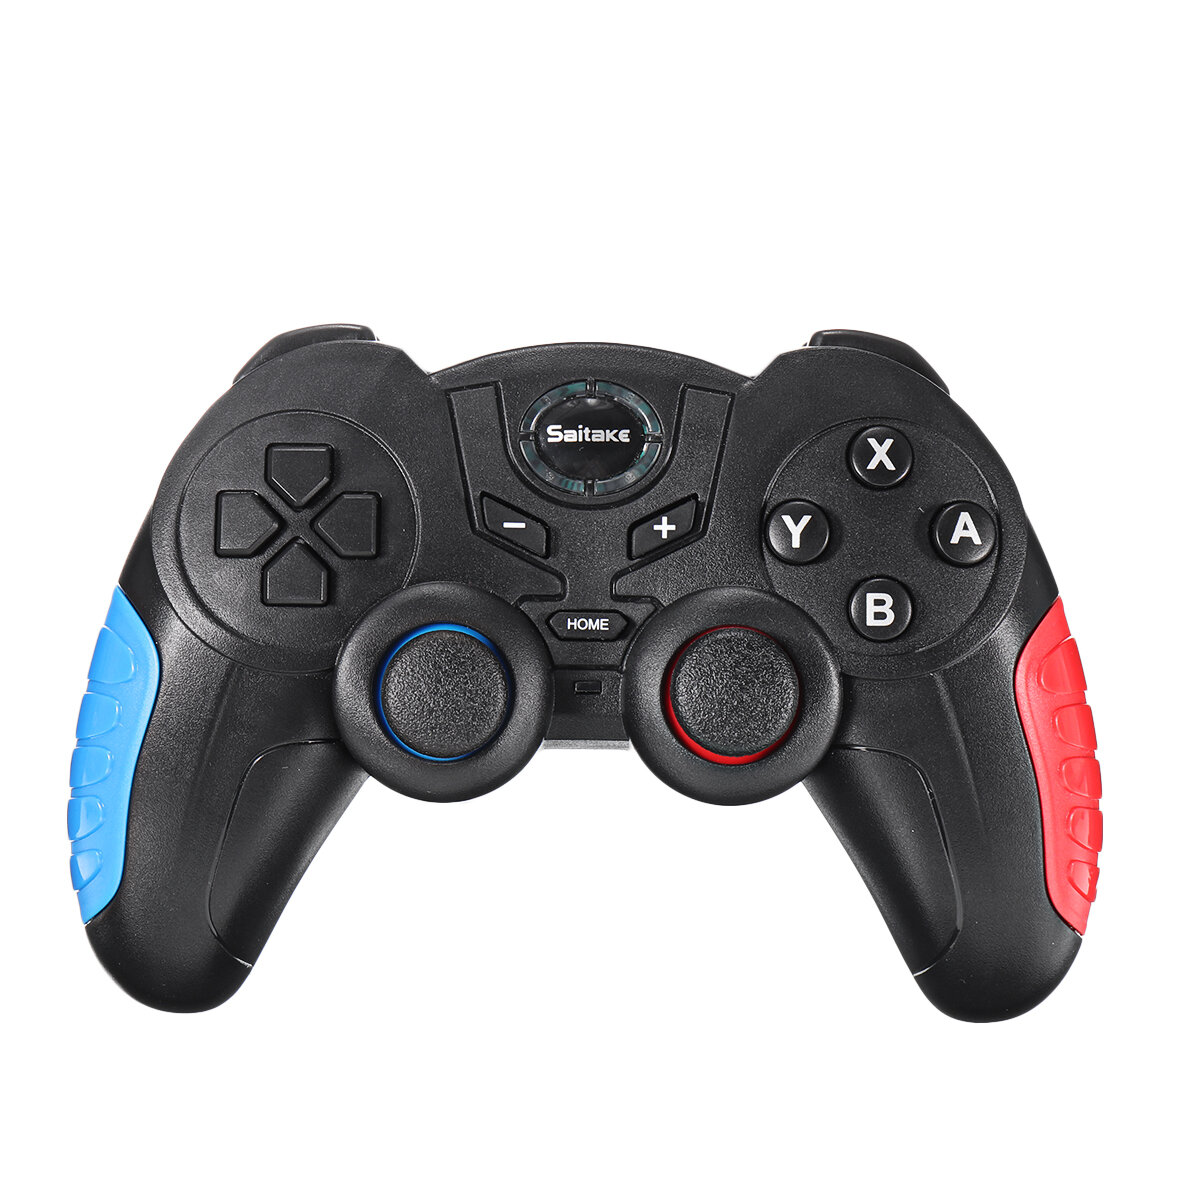 

Saitake STK-7024S bluetooth Wireless Dual Vibration Game Controller for Nintendo Switch Six-axis Gyroscope Gamepad for P